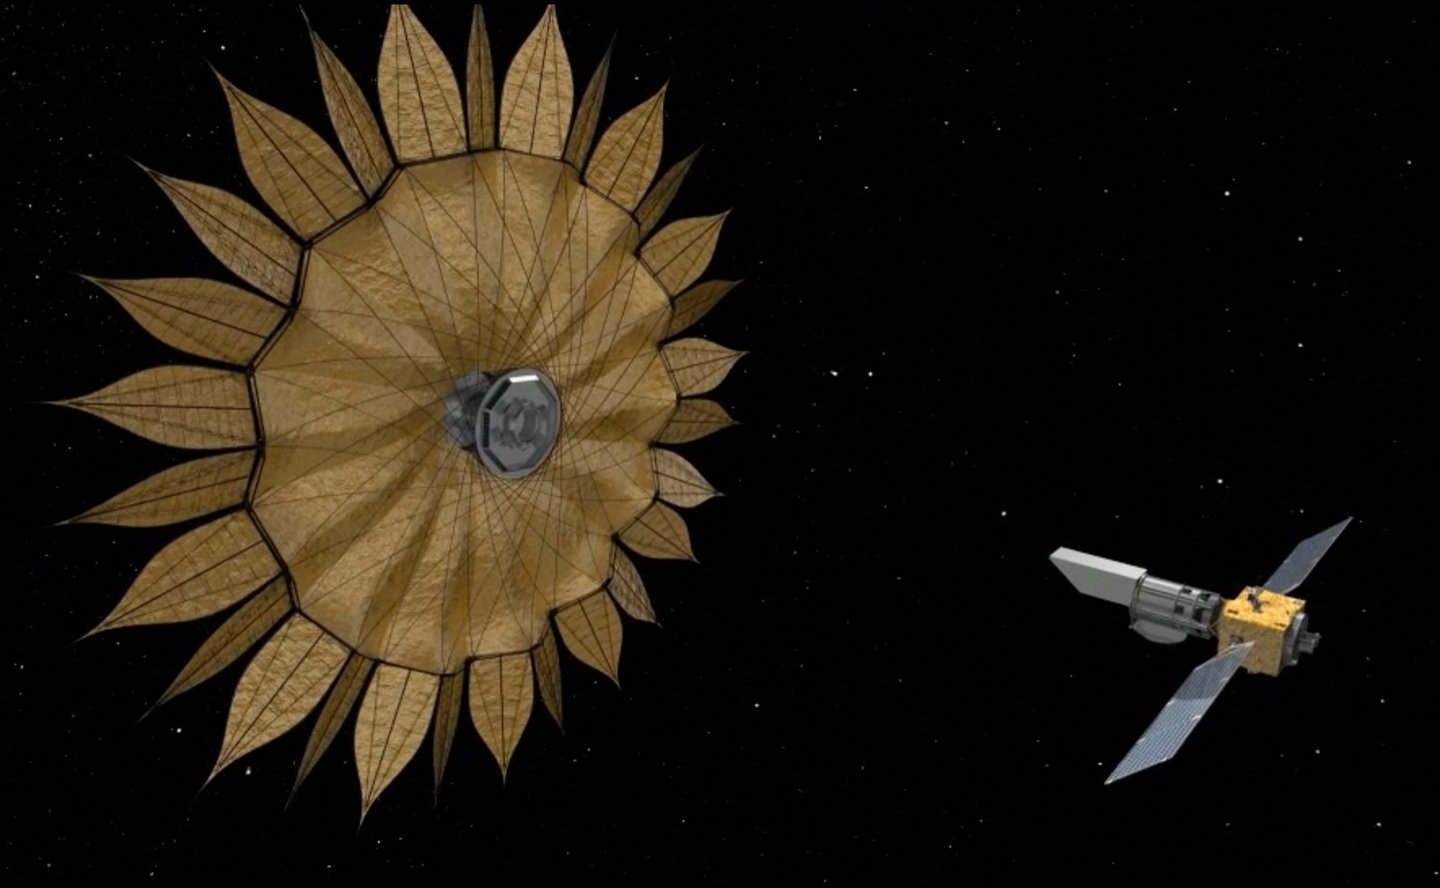 a large sunflower-shaped shade that unfurled from a satellite in space